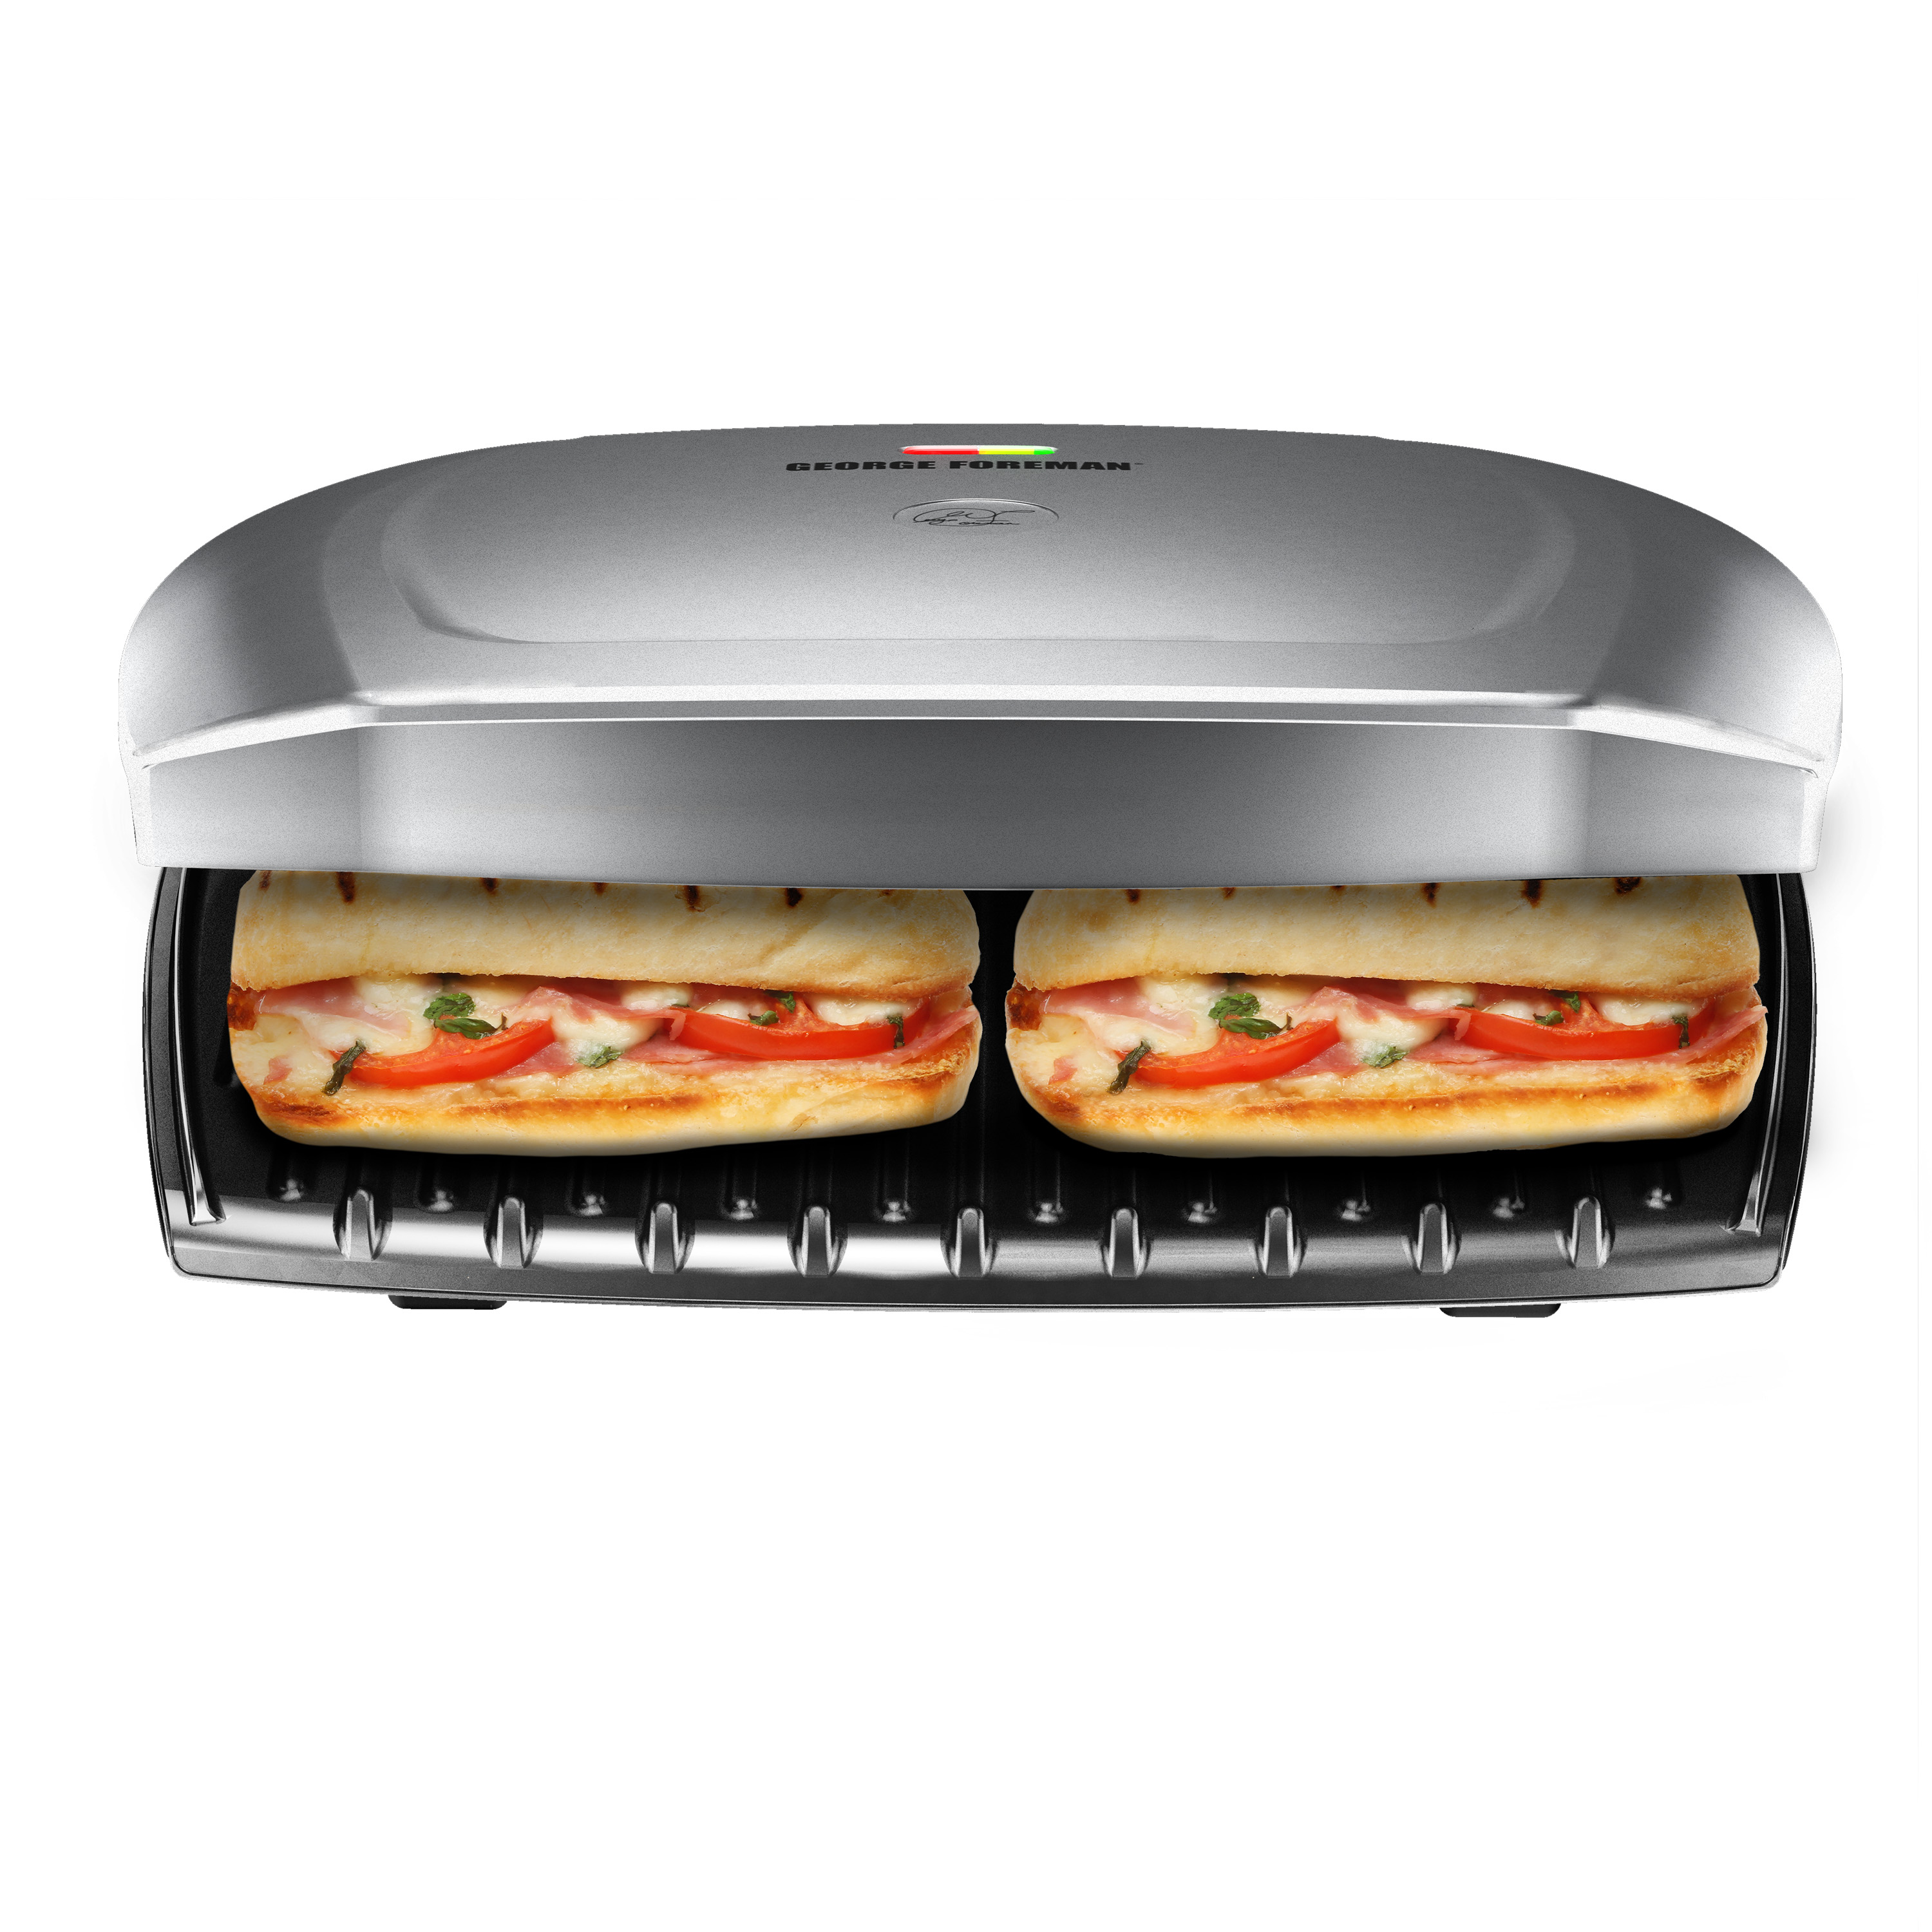 George Foreman 9-Serving Classic Plate Electric Indoor Grill and Panini Press, Platinum, GR2144P - image 1 of 11